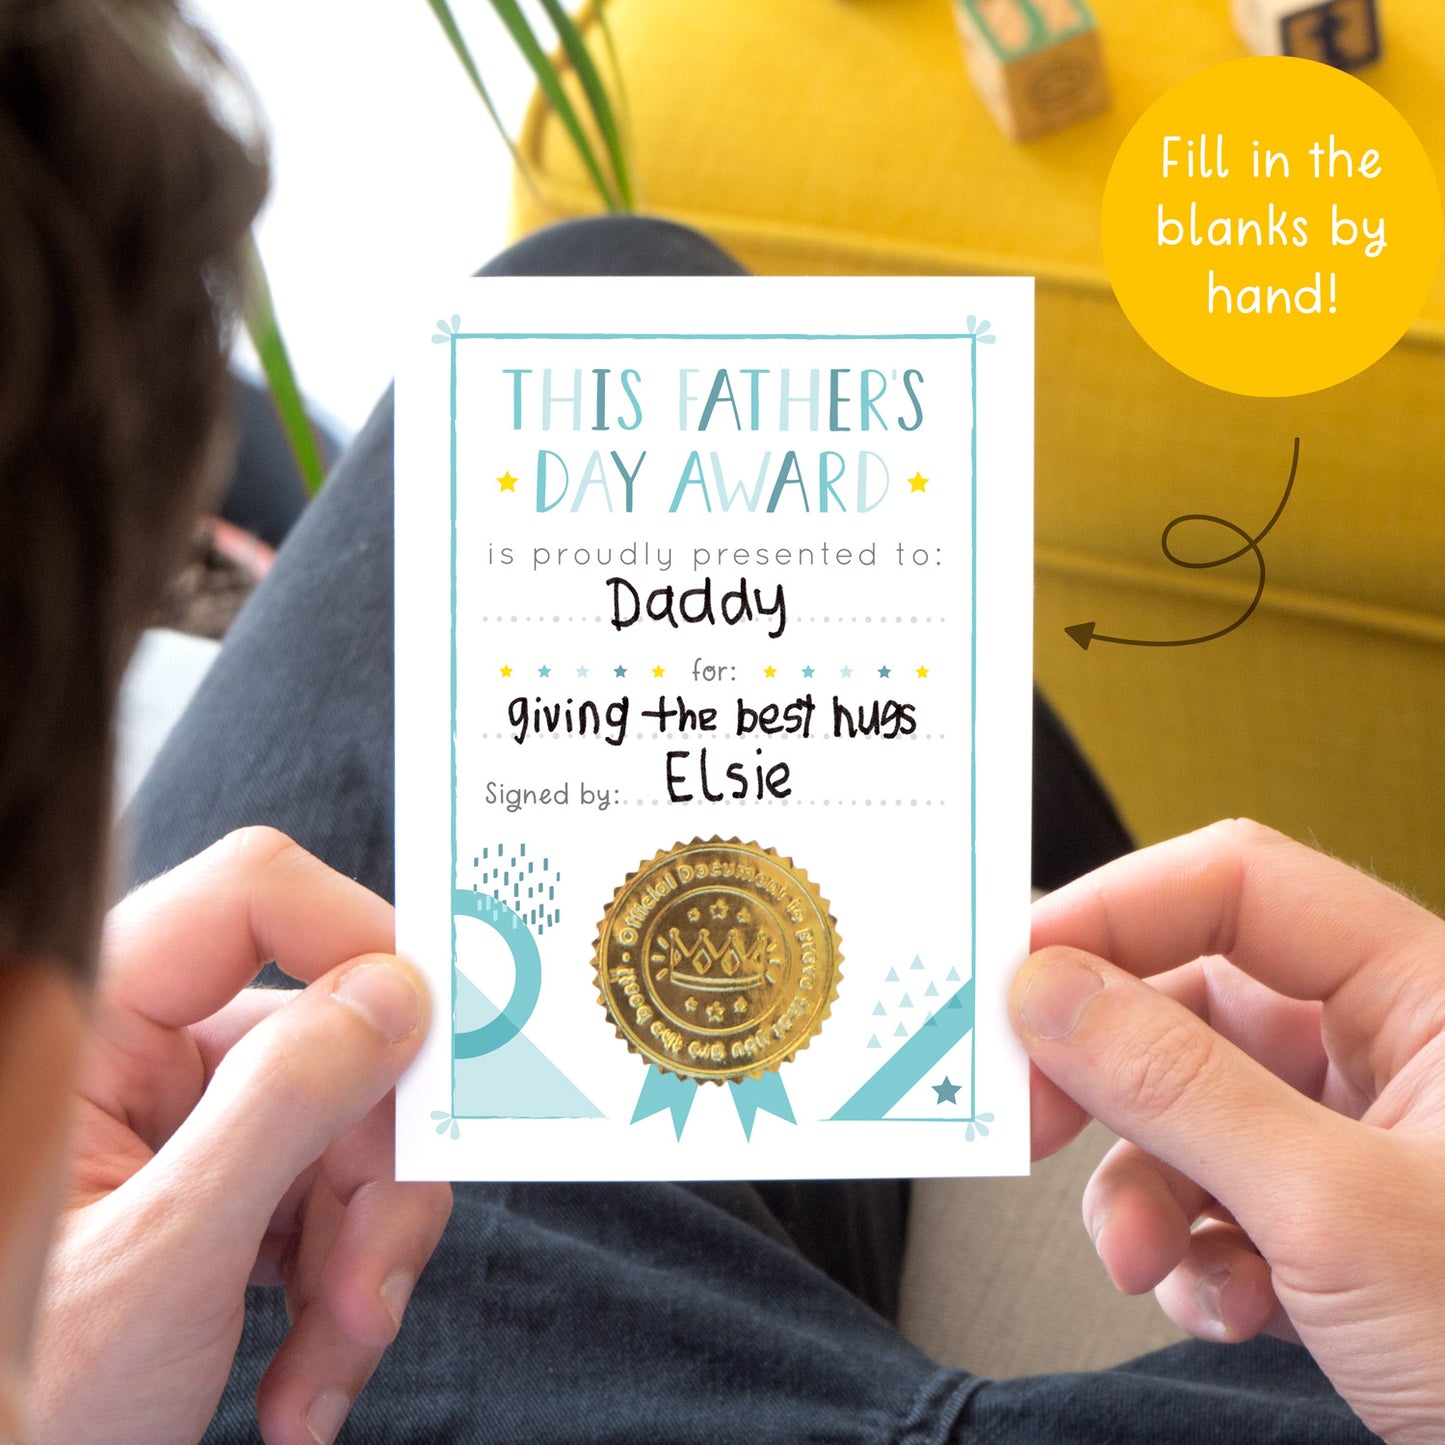 The Fathers day award card being held by a male on a sofa. There is a yellow footstool in the top right and he is holding the version of the card that a child has filled out for him. This card is blue and white in colour with a shiny gold certificate seal.